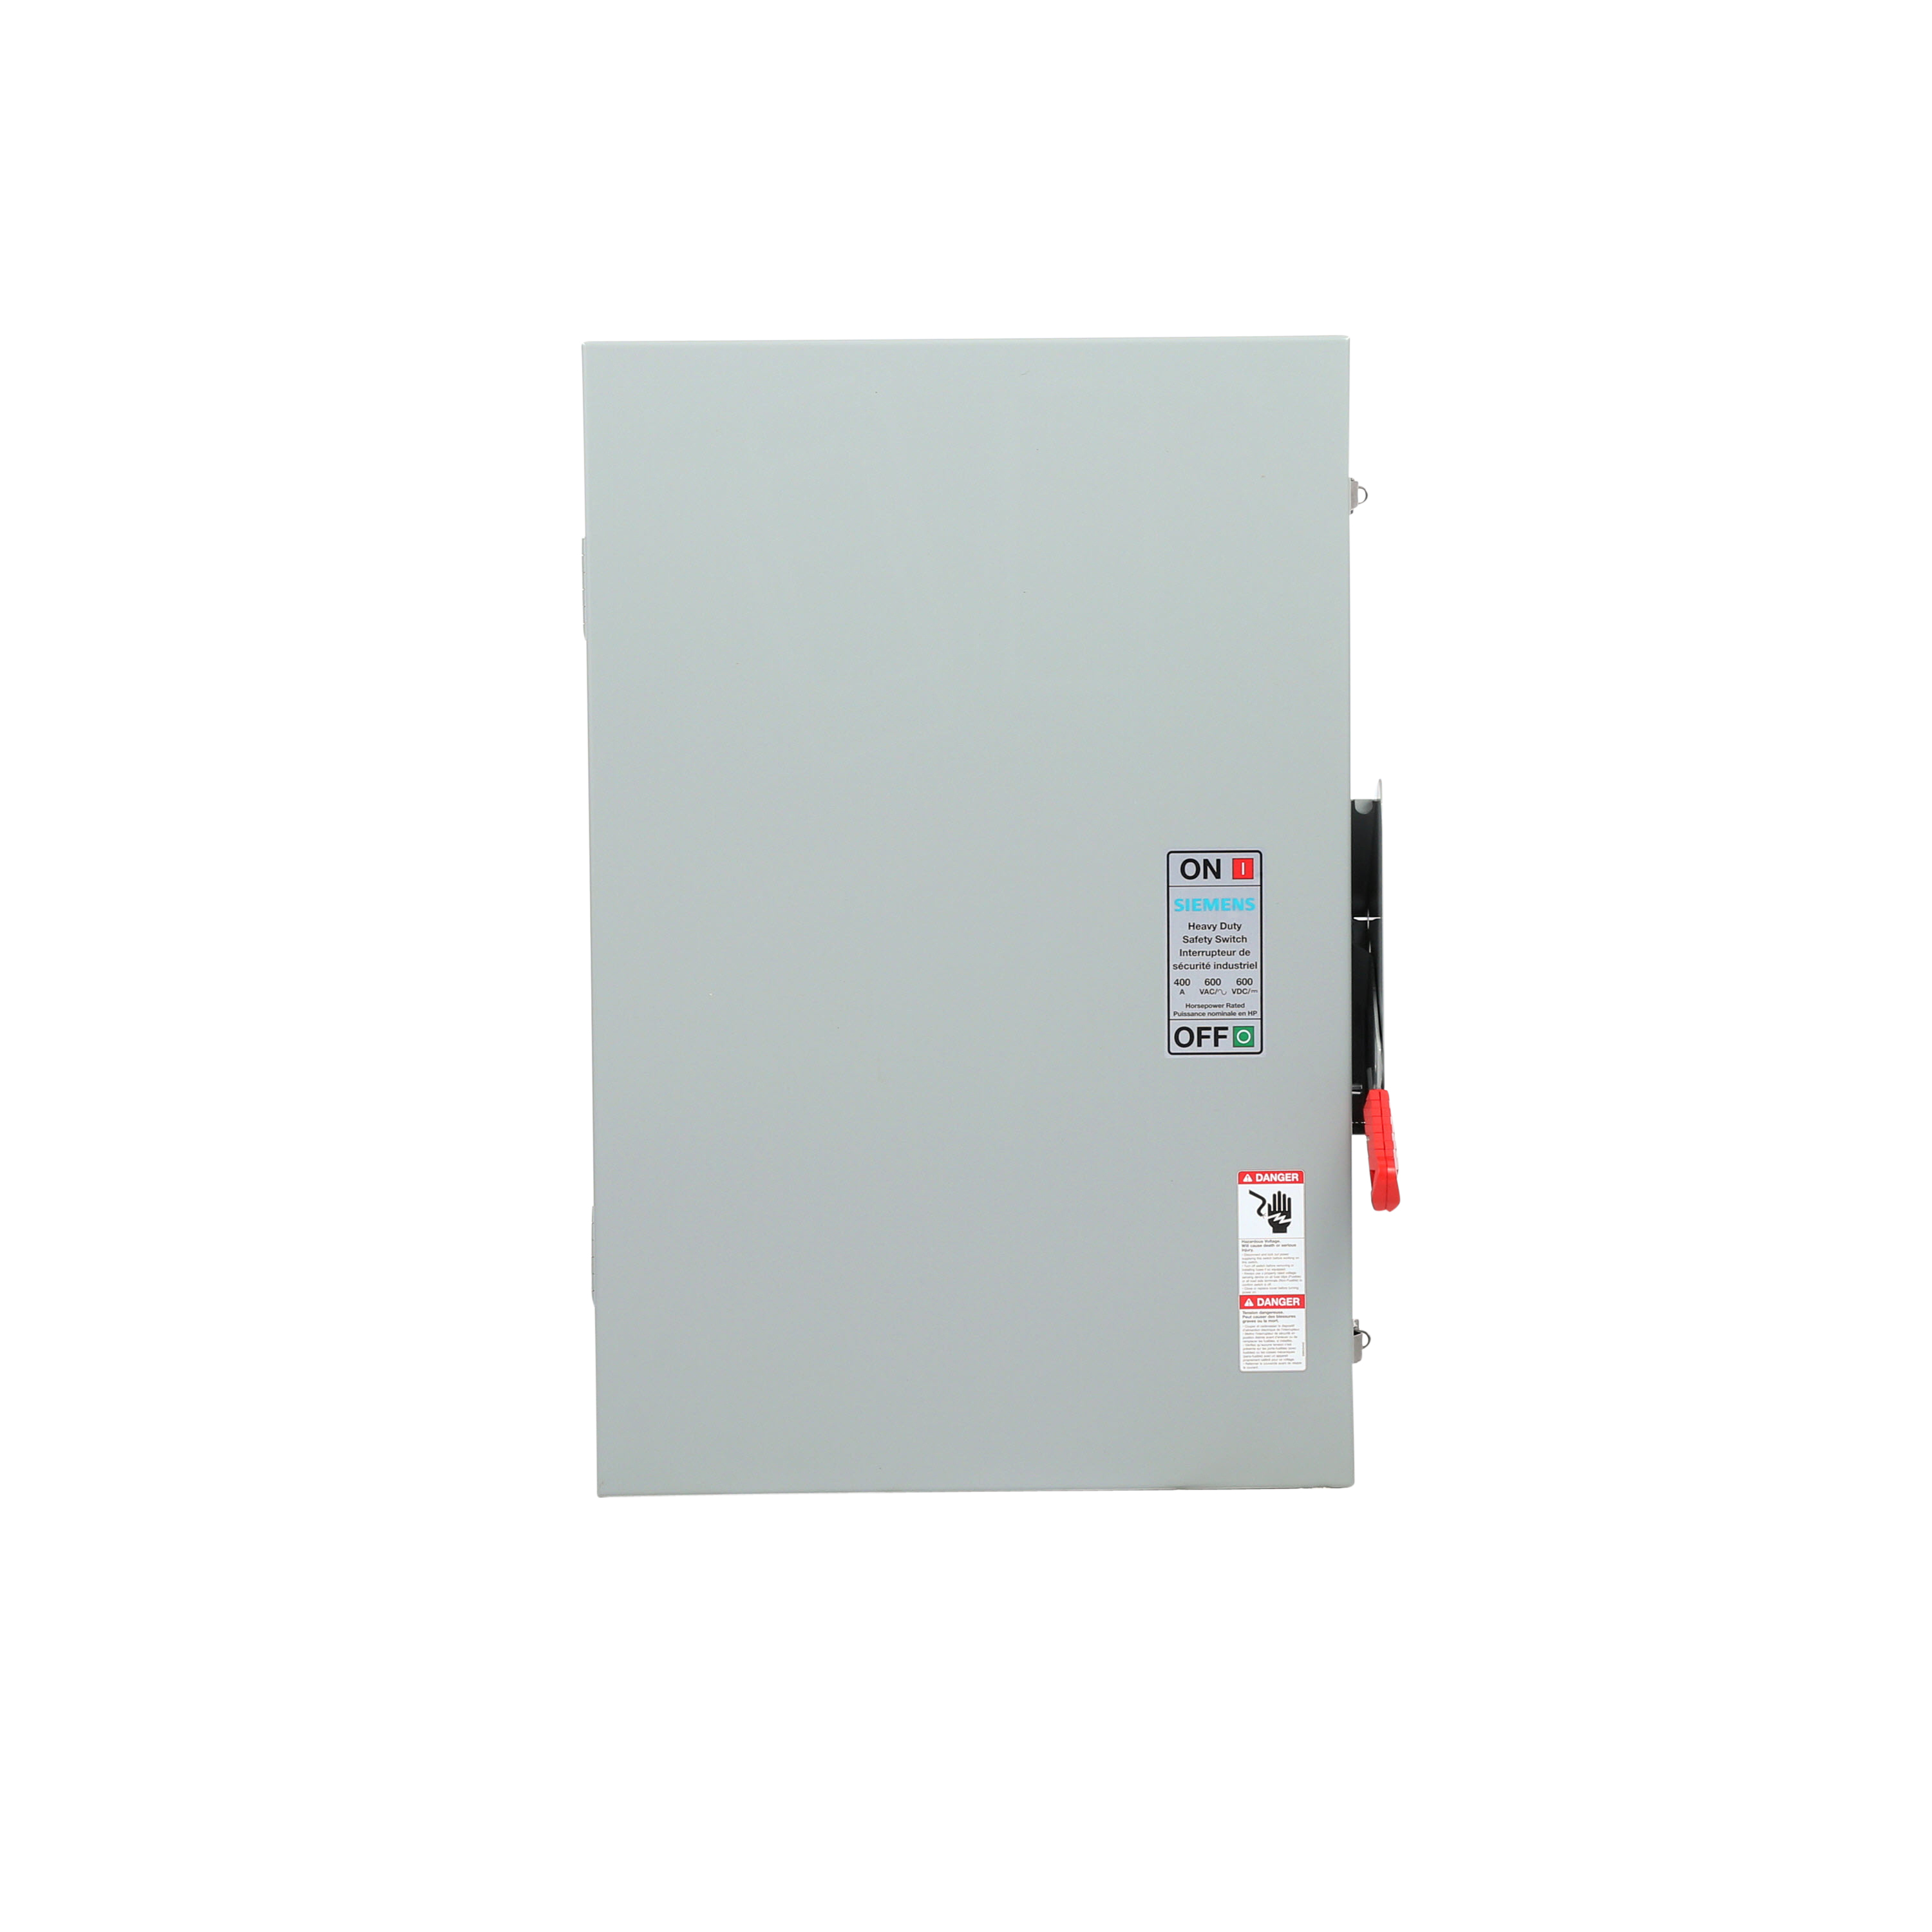 Siemens Low Voltage Circuit Protection Heavy Duty Safety Switch. 3-Pole Non-Fused in a type 3R enclosure (outdoor). Rated 600VAC (400A).